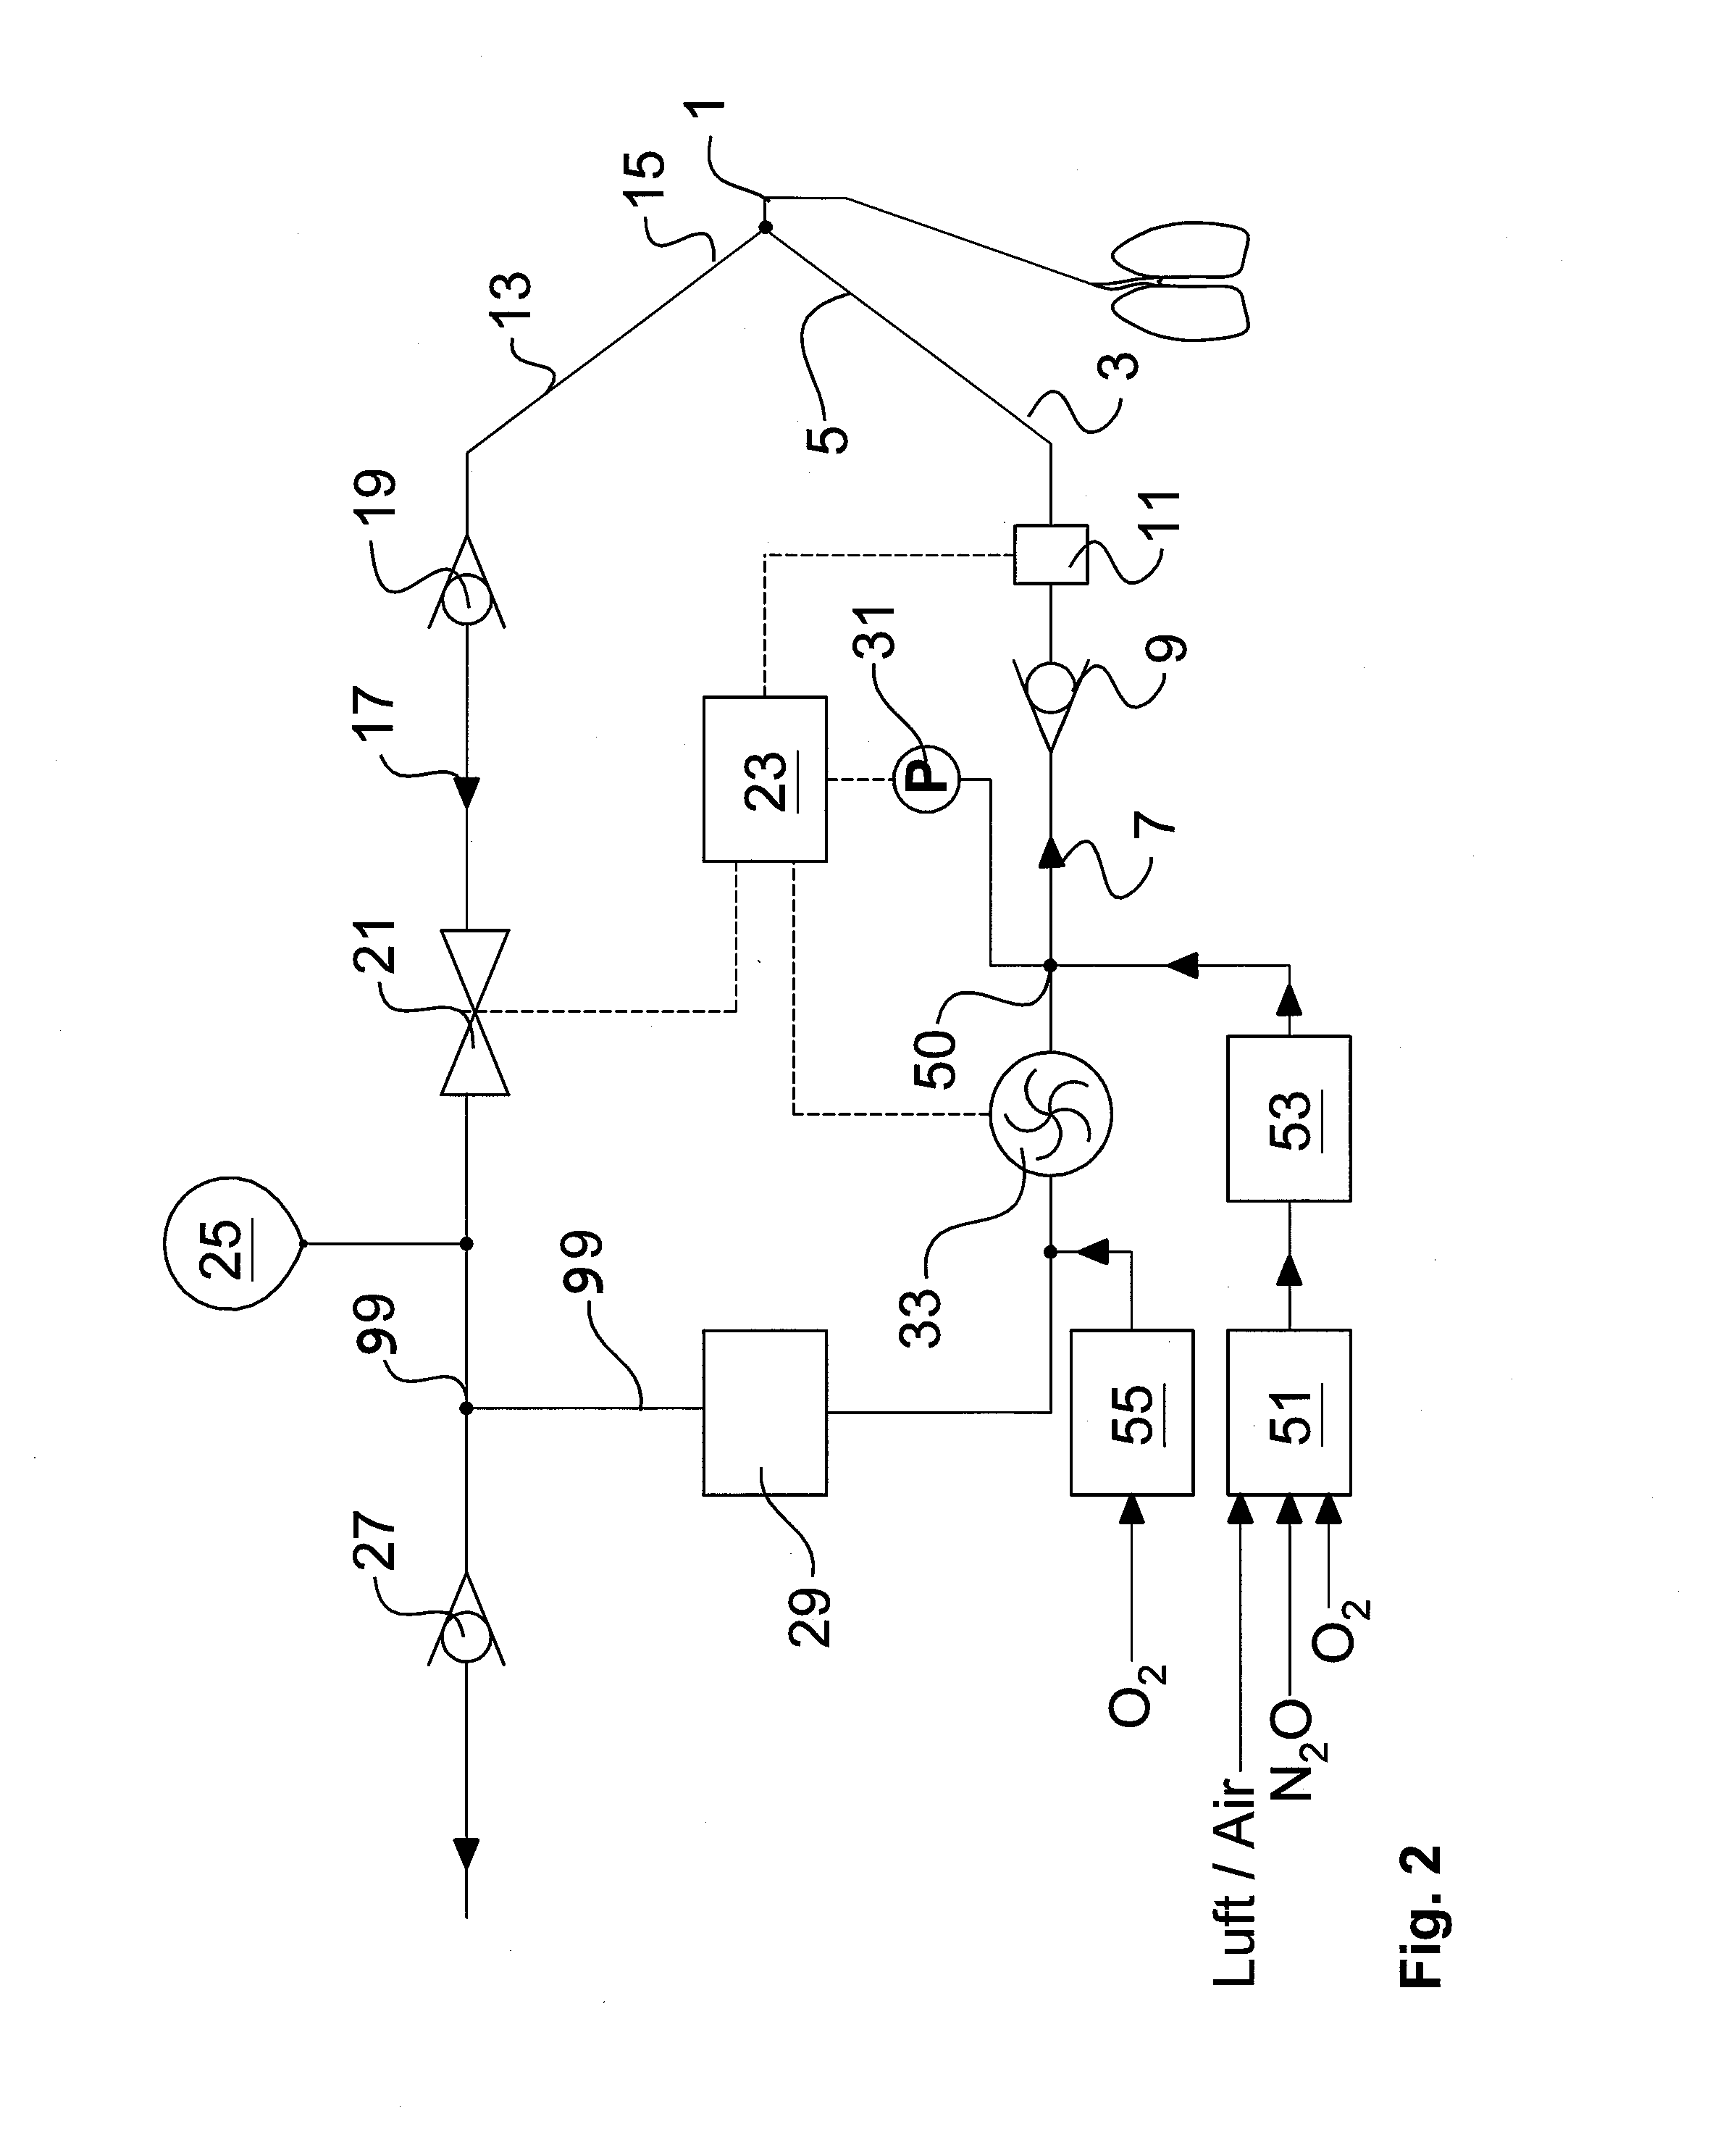 Respiration system for an anesthesia apparatus